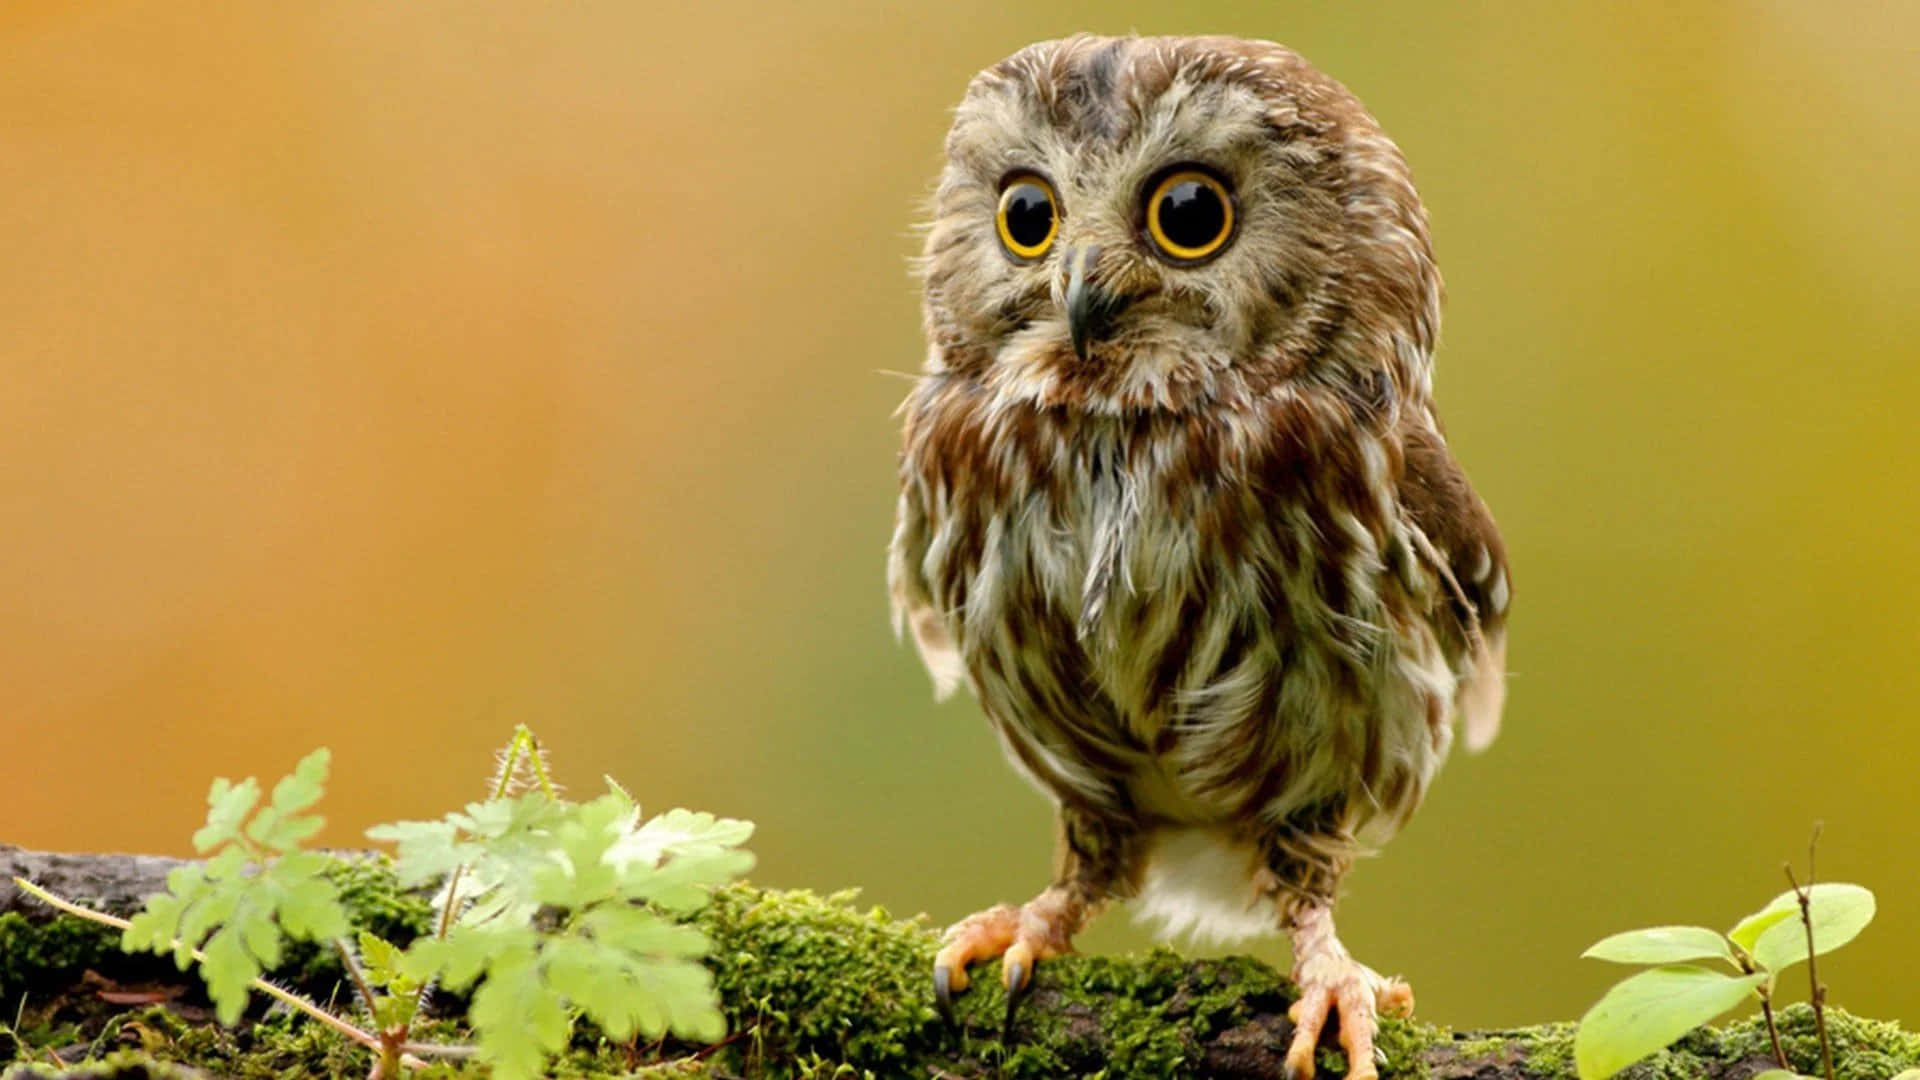 A Small Owl Is Sitting On A Branch With Moss